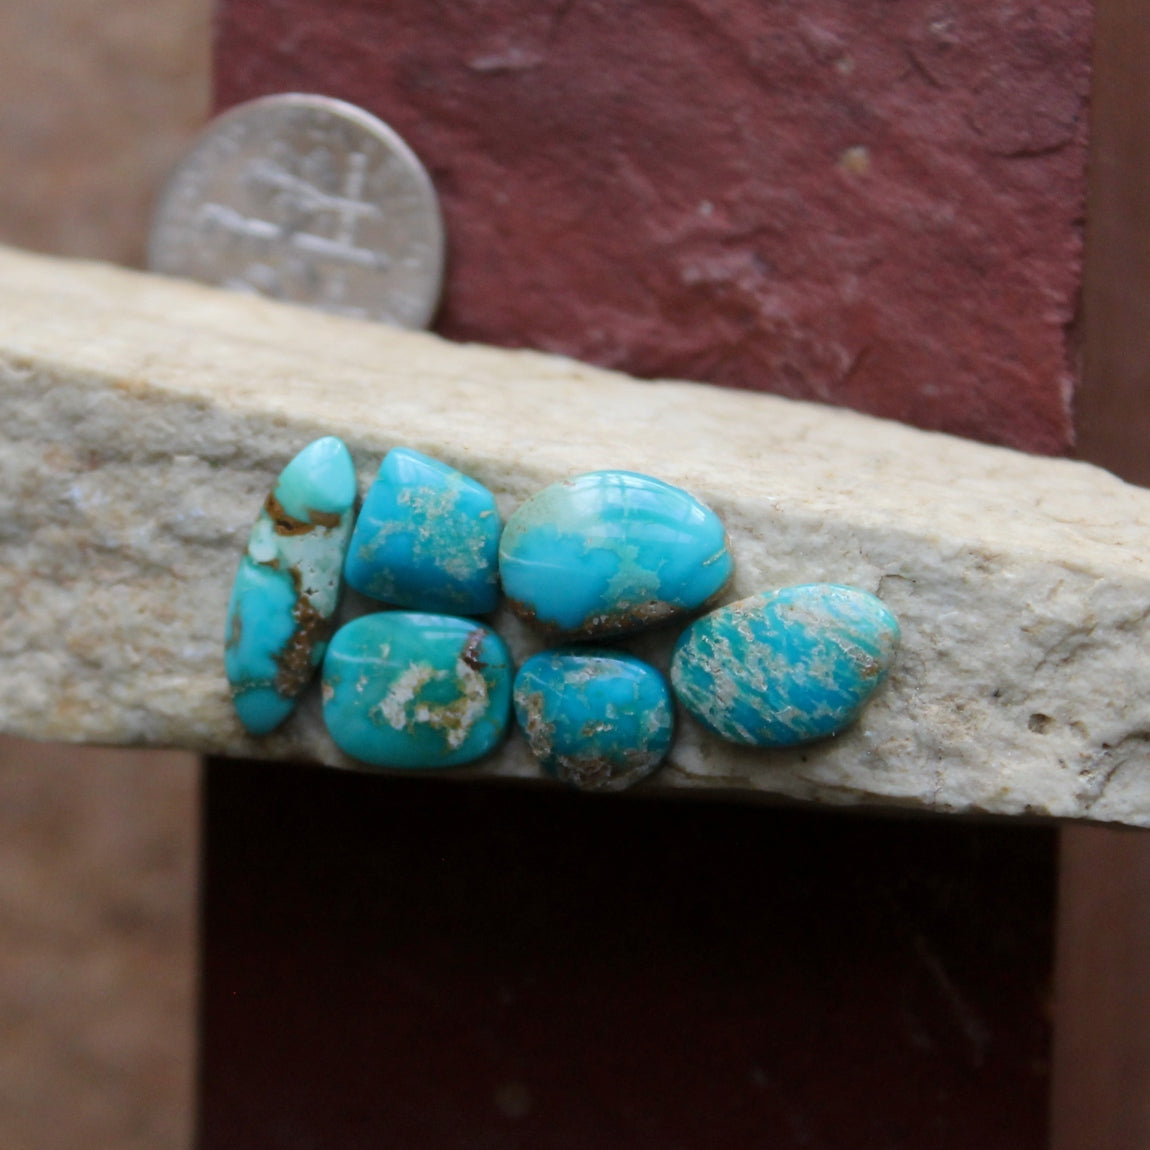 Small and deep blue for this blue Stone Mountain Turquoise cabochon suite